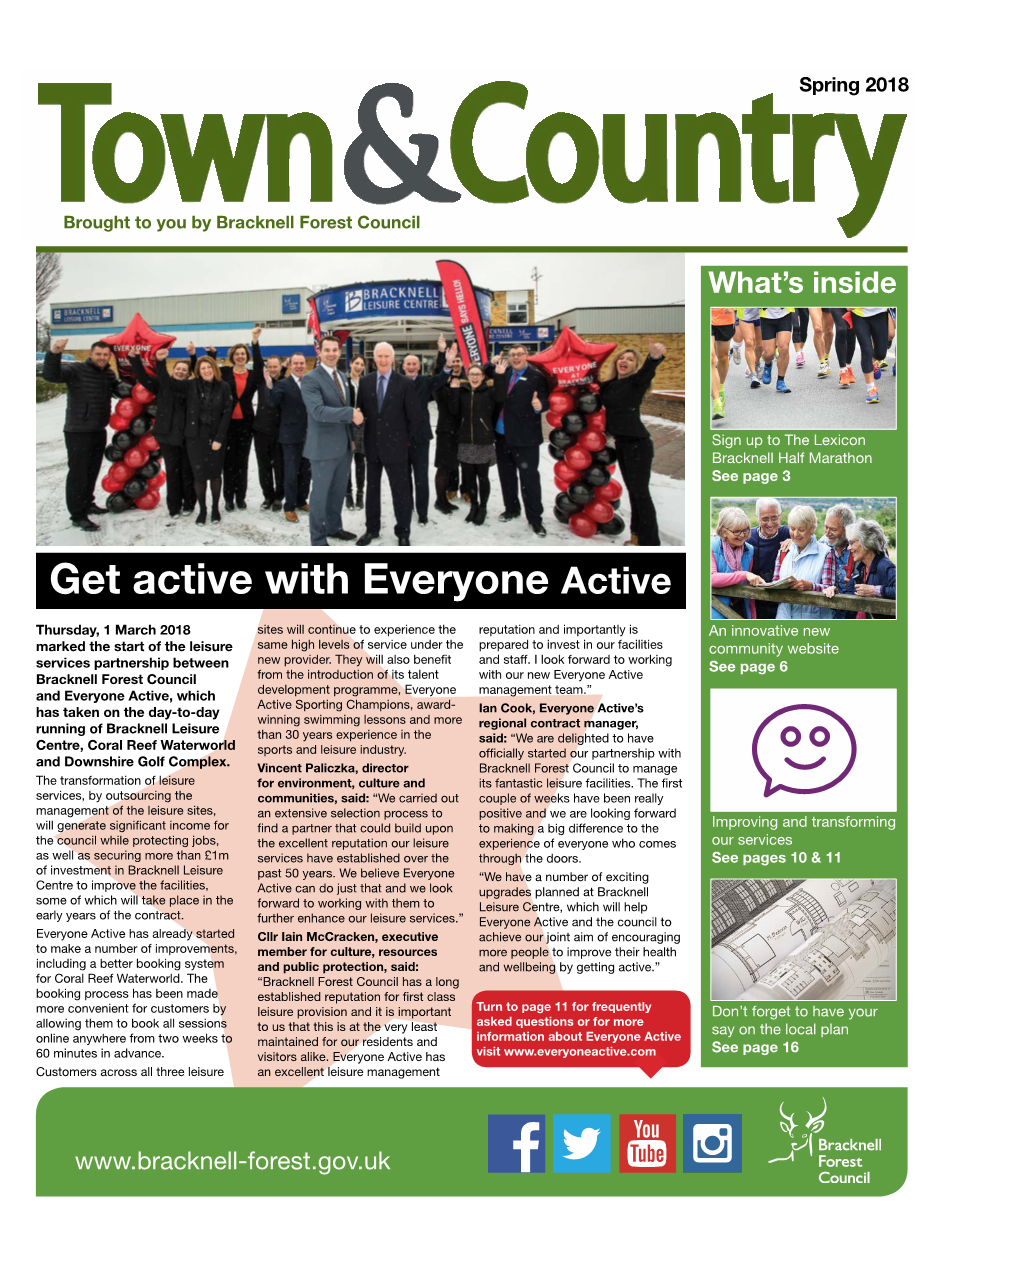 Town and Country Spring 2018